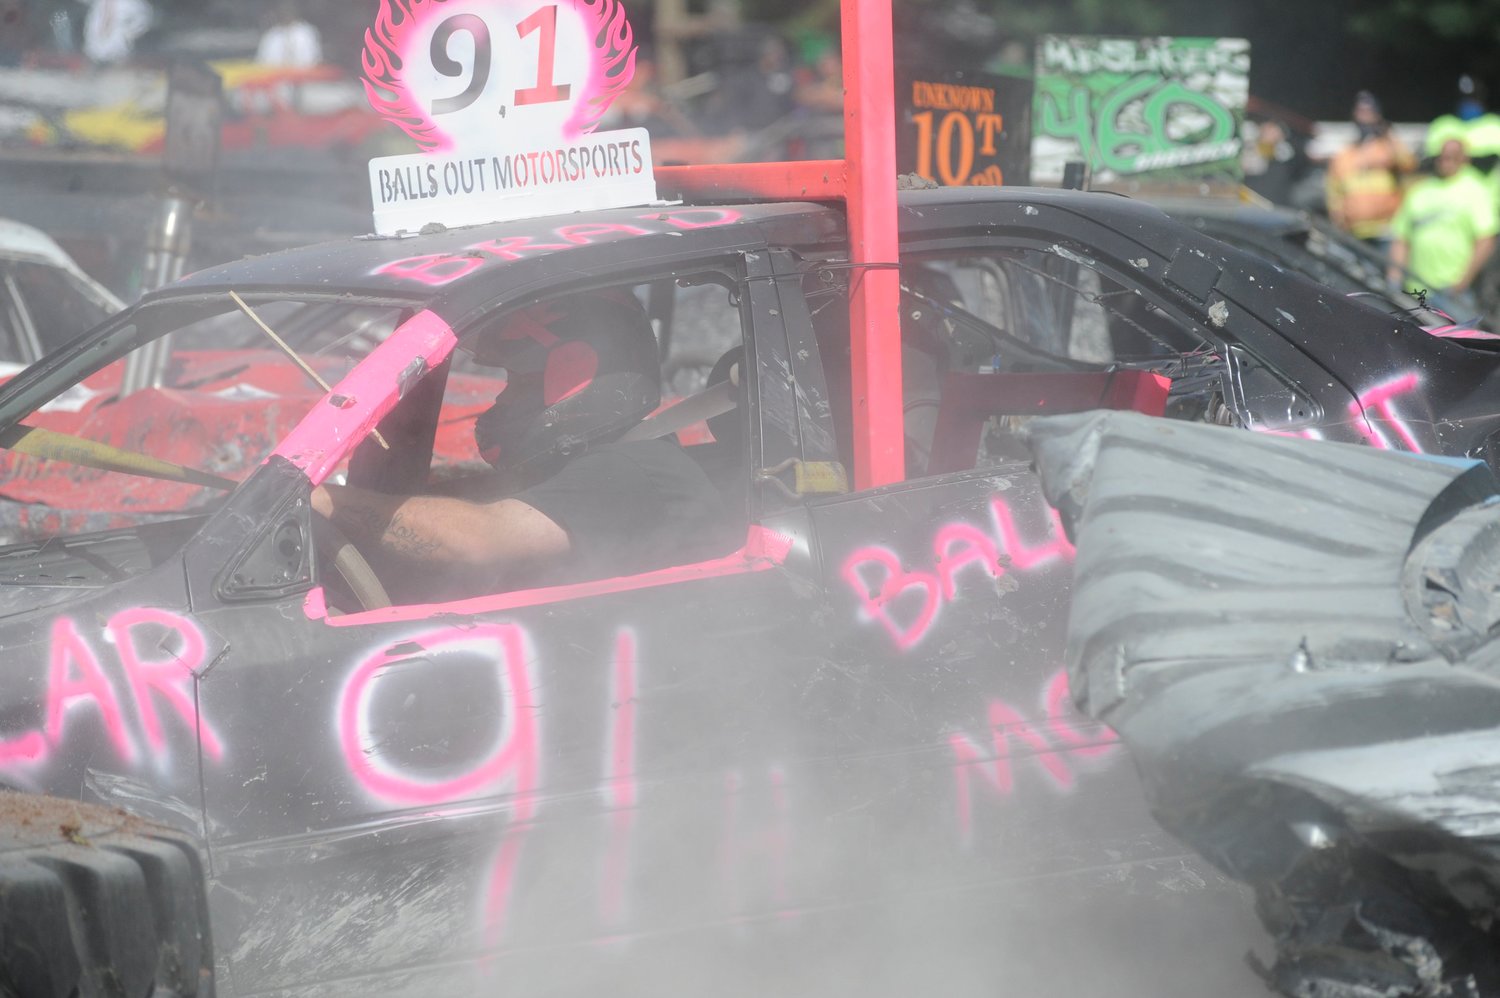 Ask your father what it means. Car #91 displays one of the more colorful names assigned to a demolition challenger.